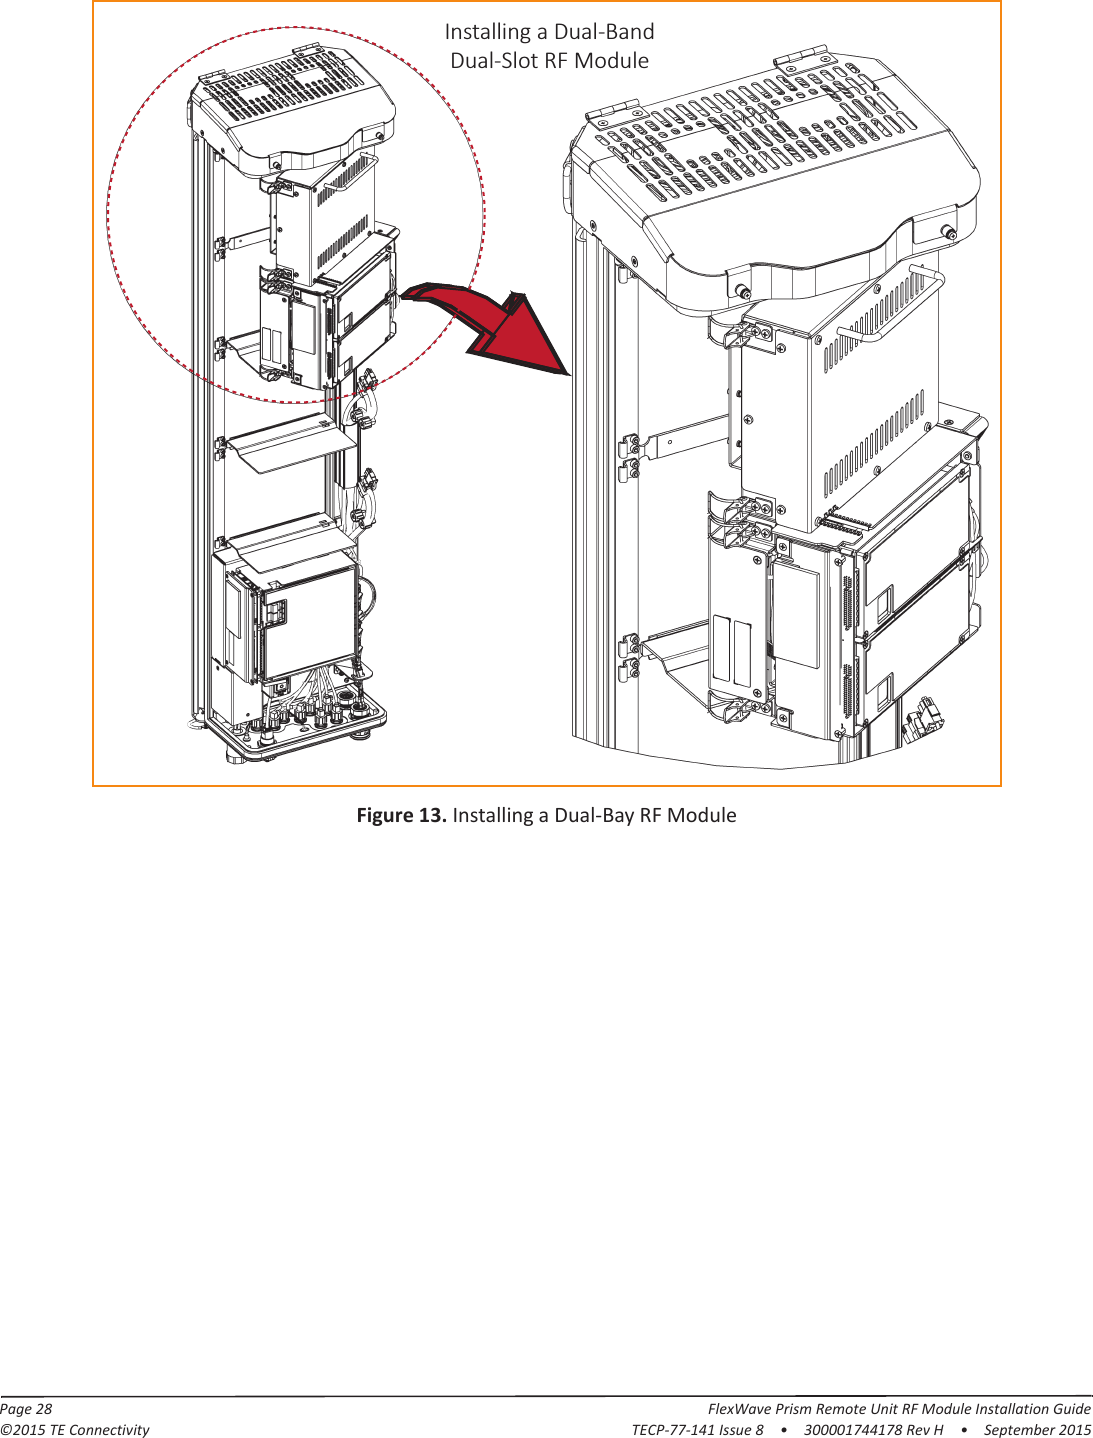 Page 28 FlexWave Prism Remote Unit RF Module Installation Guide©2015 TE Connectivity TECP-77-141 Issue 8  •  300001744178 Rev H  •  September 2015Figure 13. Installing a Dual-Bay RF ModuleInstalling a Dual-BandDual-Slot RF Module